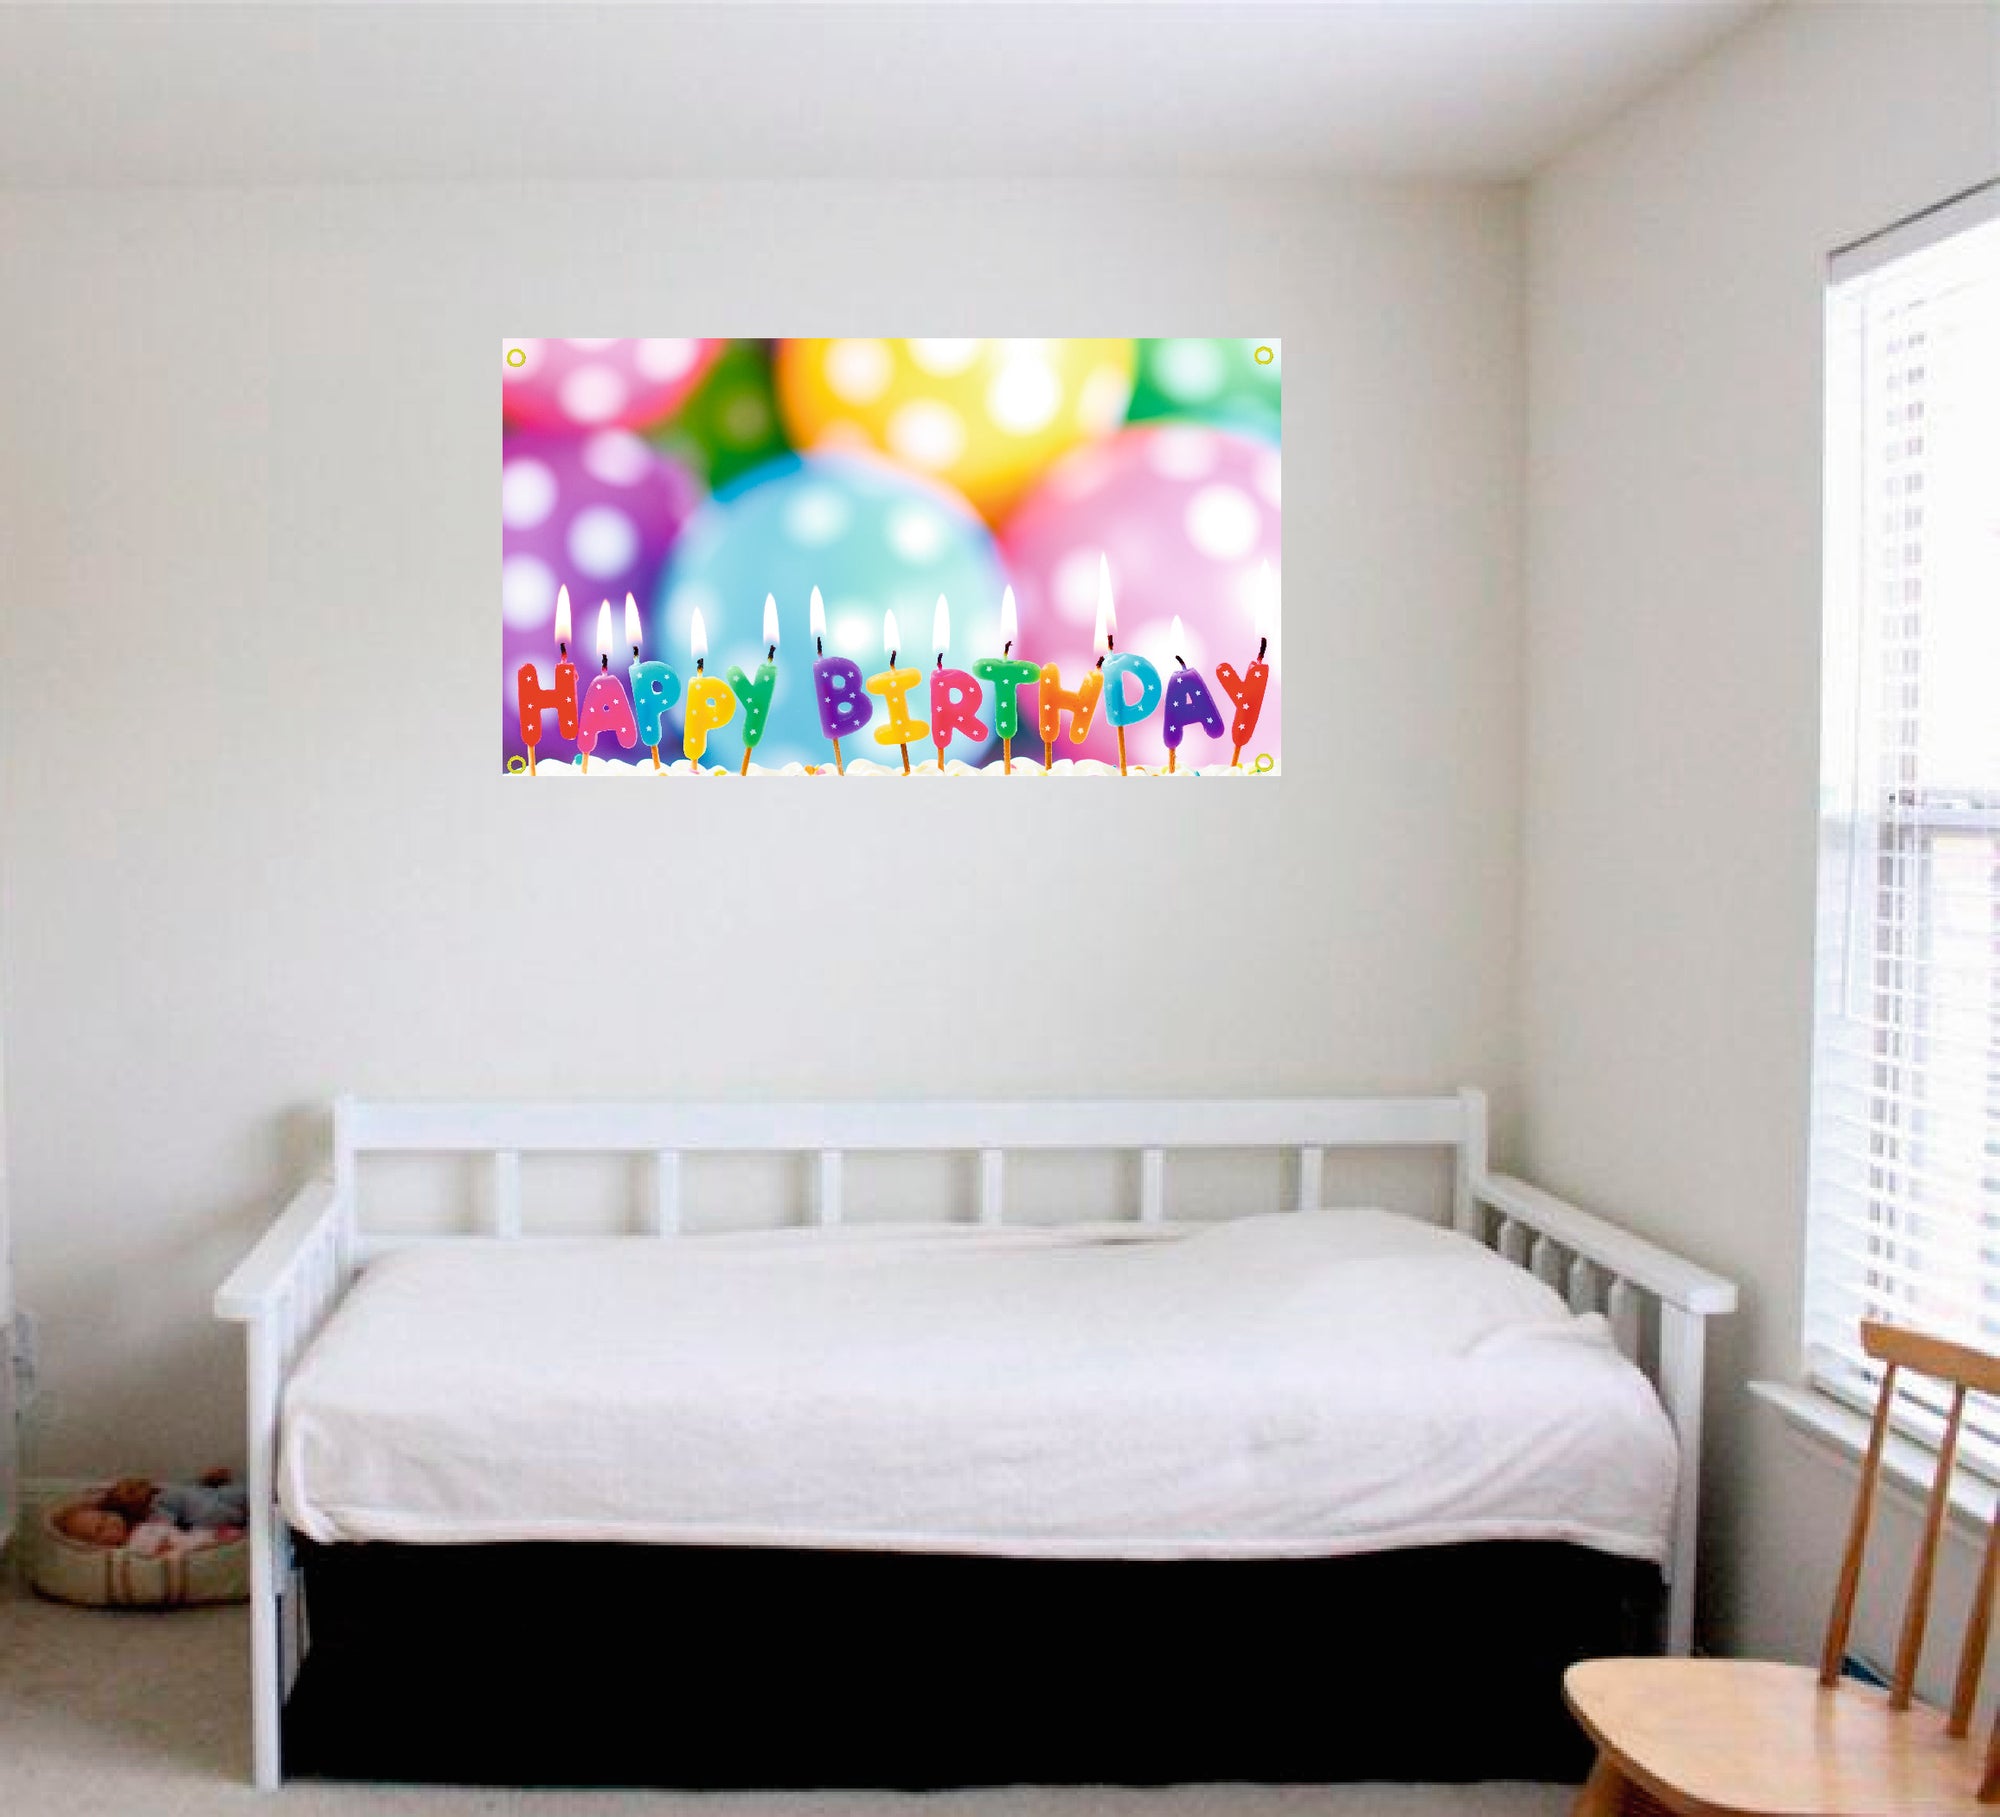 Happy Birthday candles and balloons banner